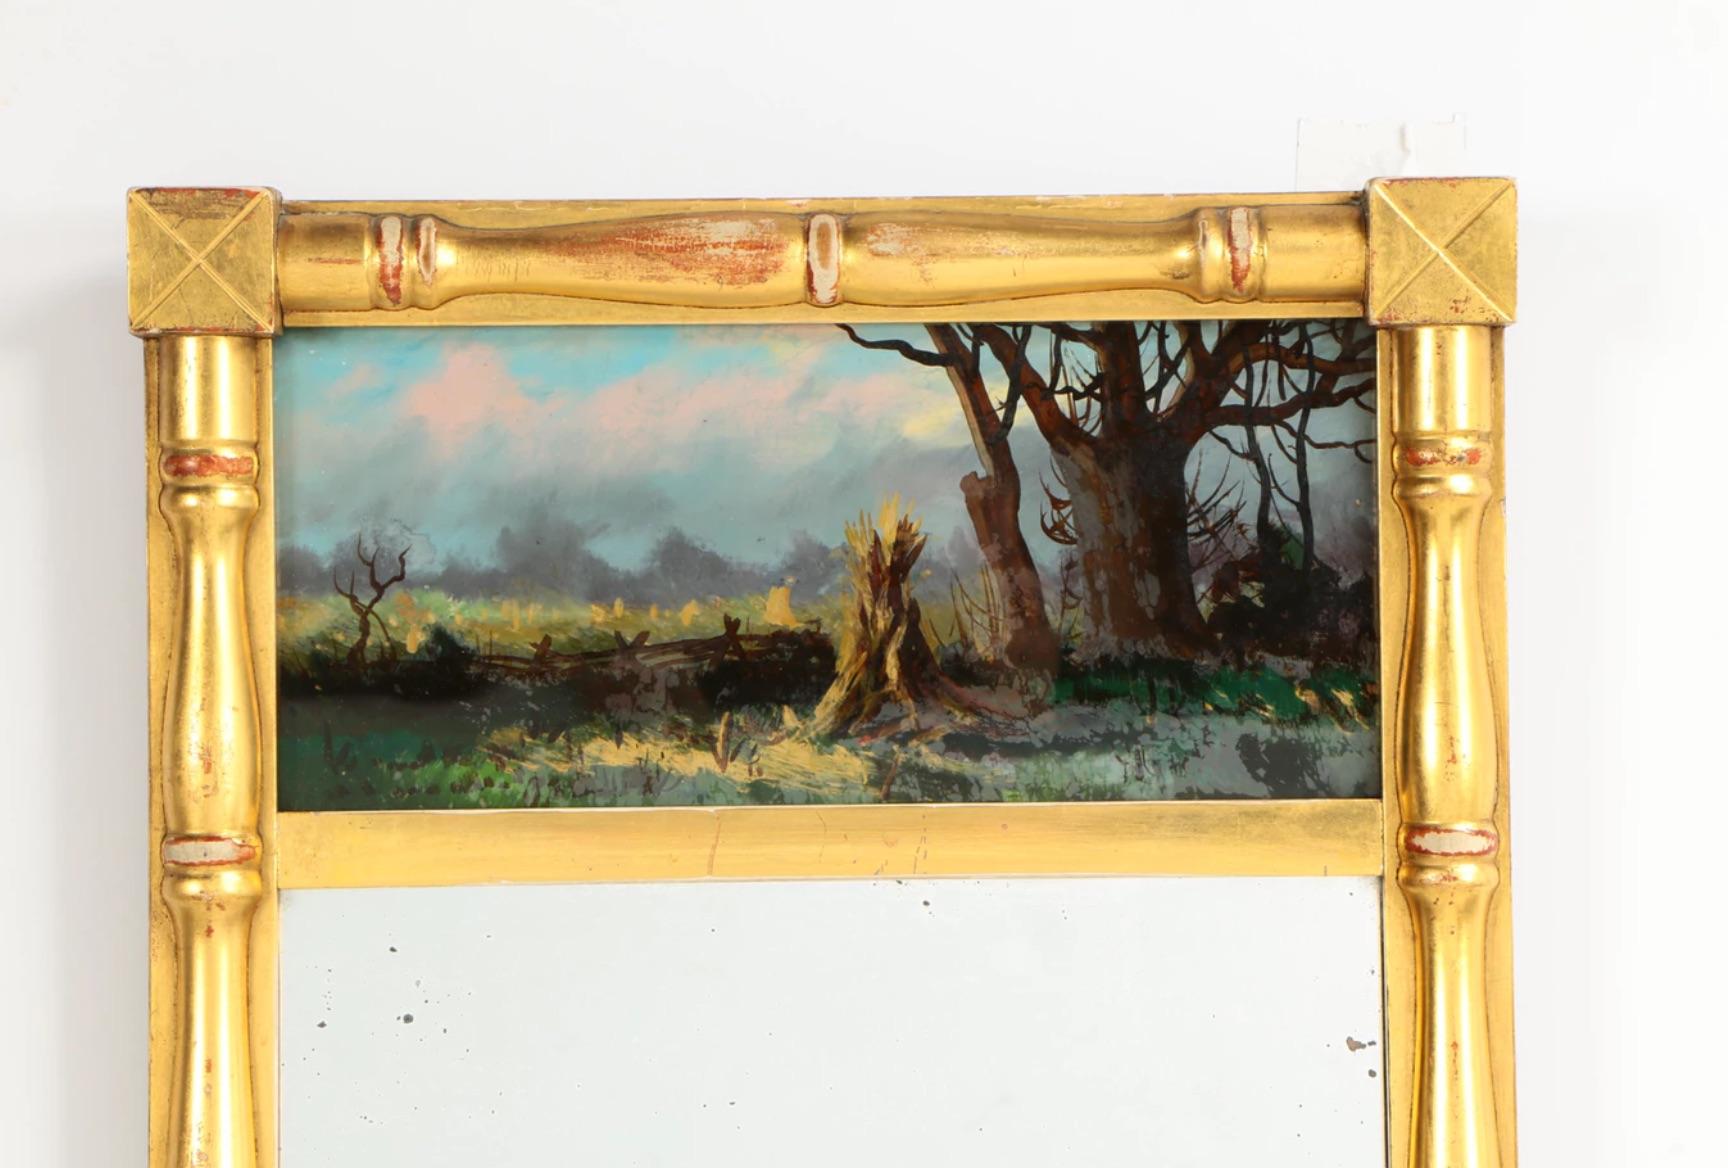 To the manner born mirror!
A superb 19th century American Classical  giltwood split Balluster Trumeau mirror with reverse painted glass field scene.
A lovely giltwood Trumeau mirror The top scene is a reverse glass painting of a winter landscape.